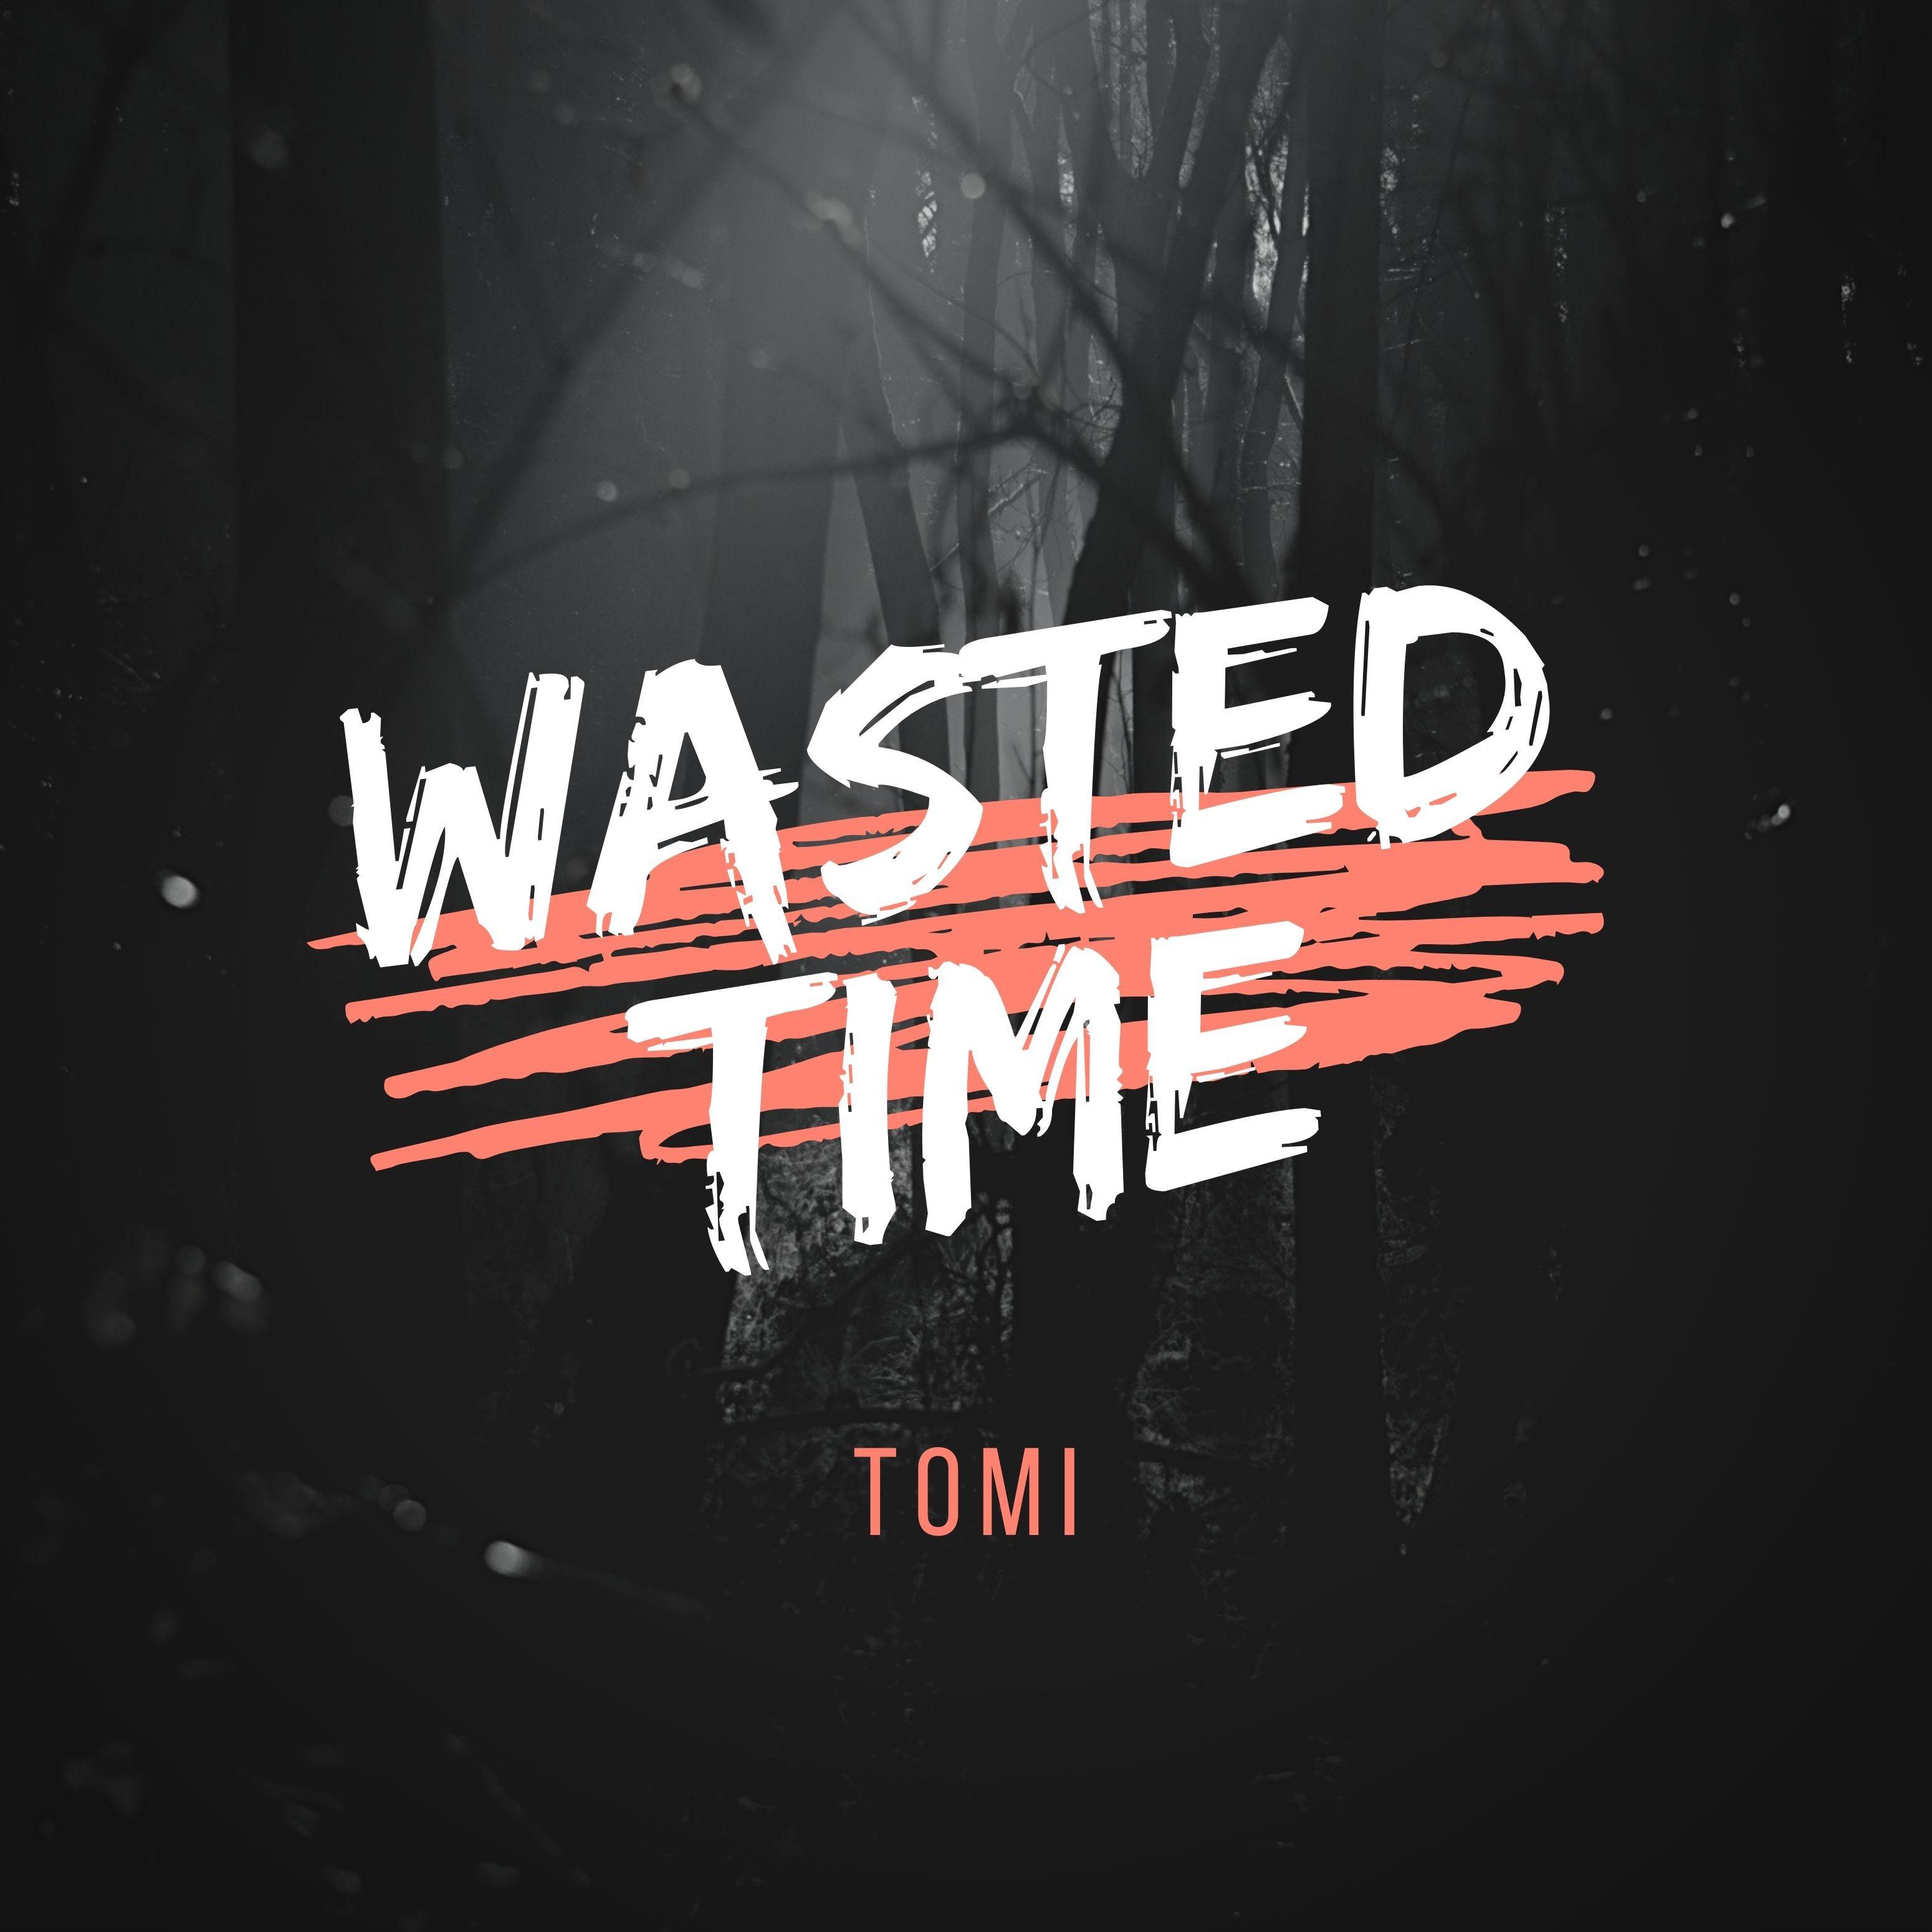 Time wasted on steam фото 2